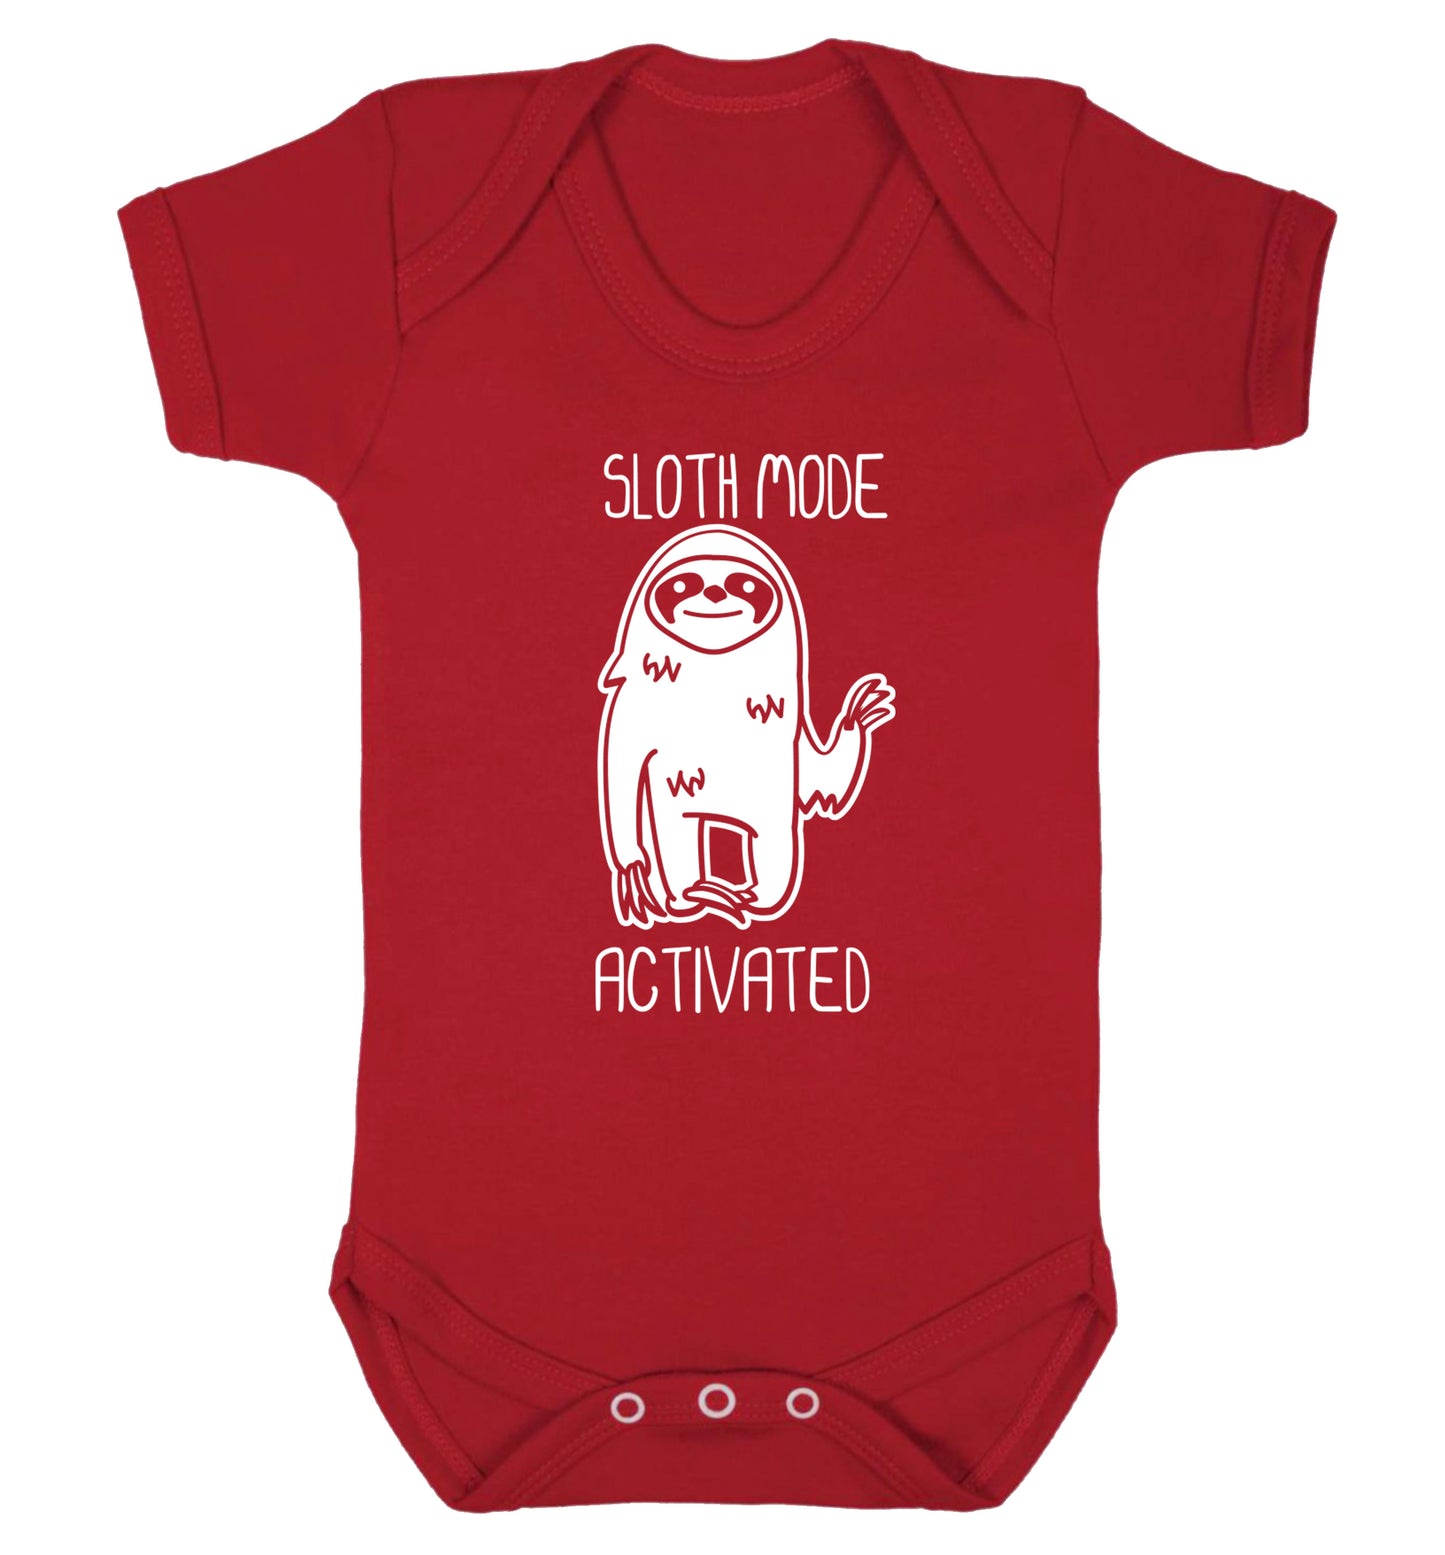 Sloth mode acitvated Baby Vest red 18-24 months